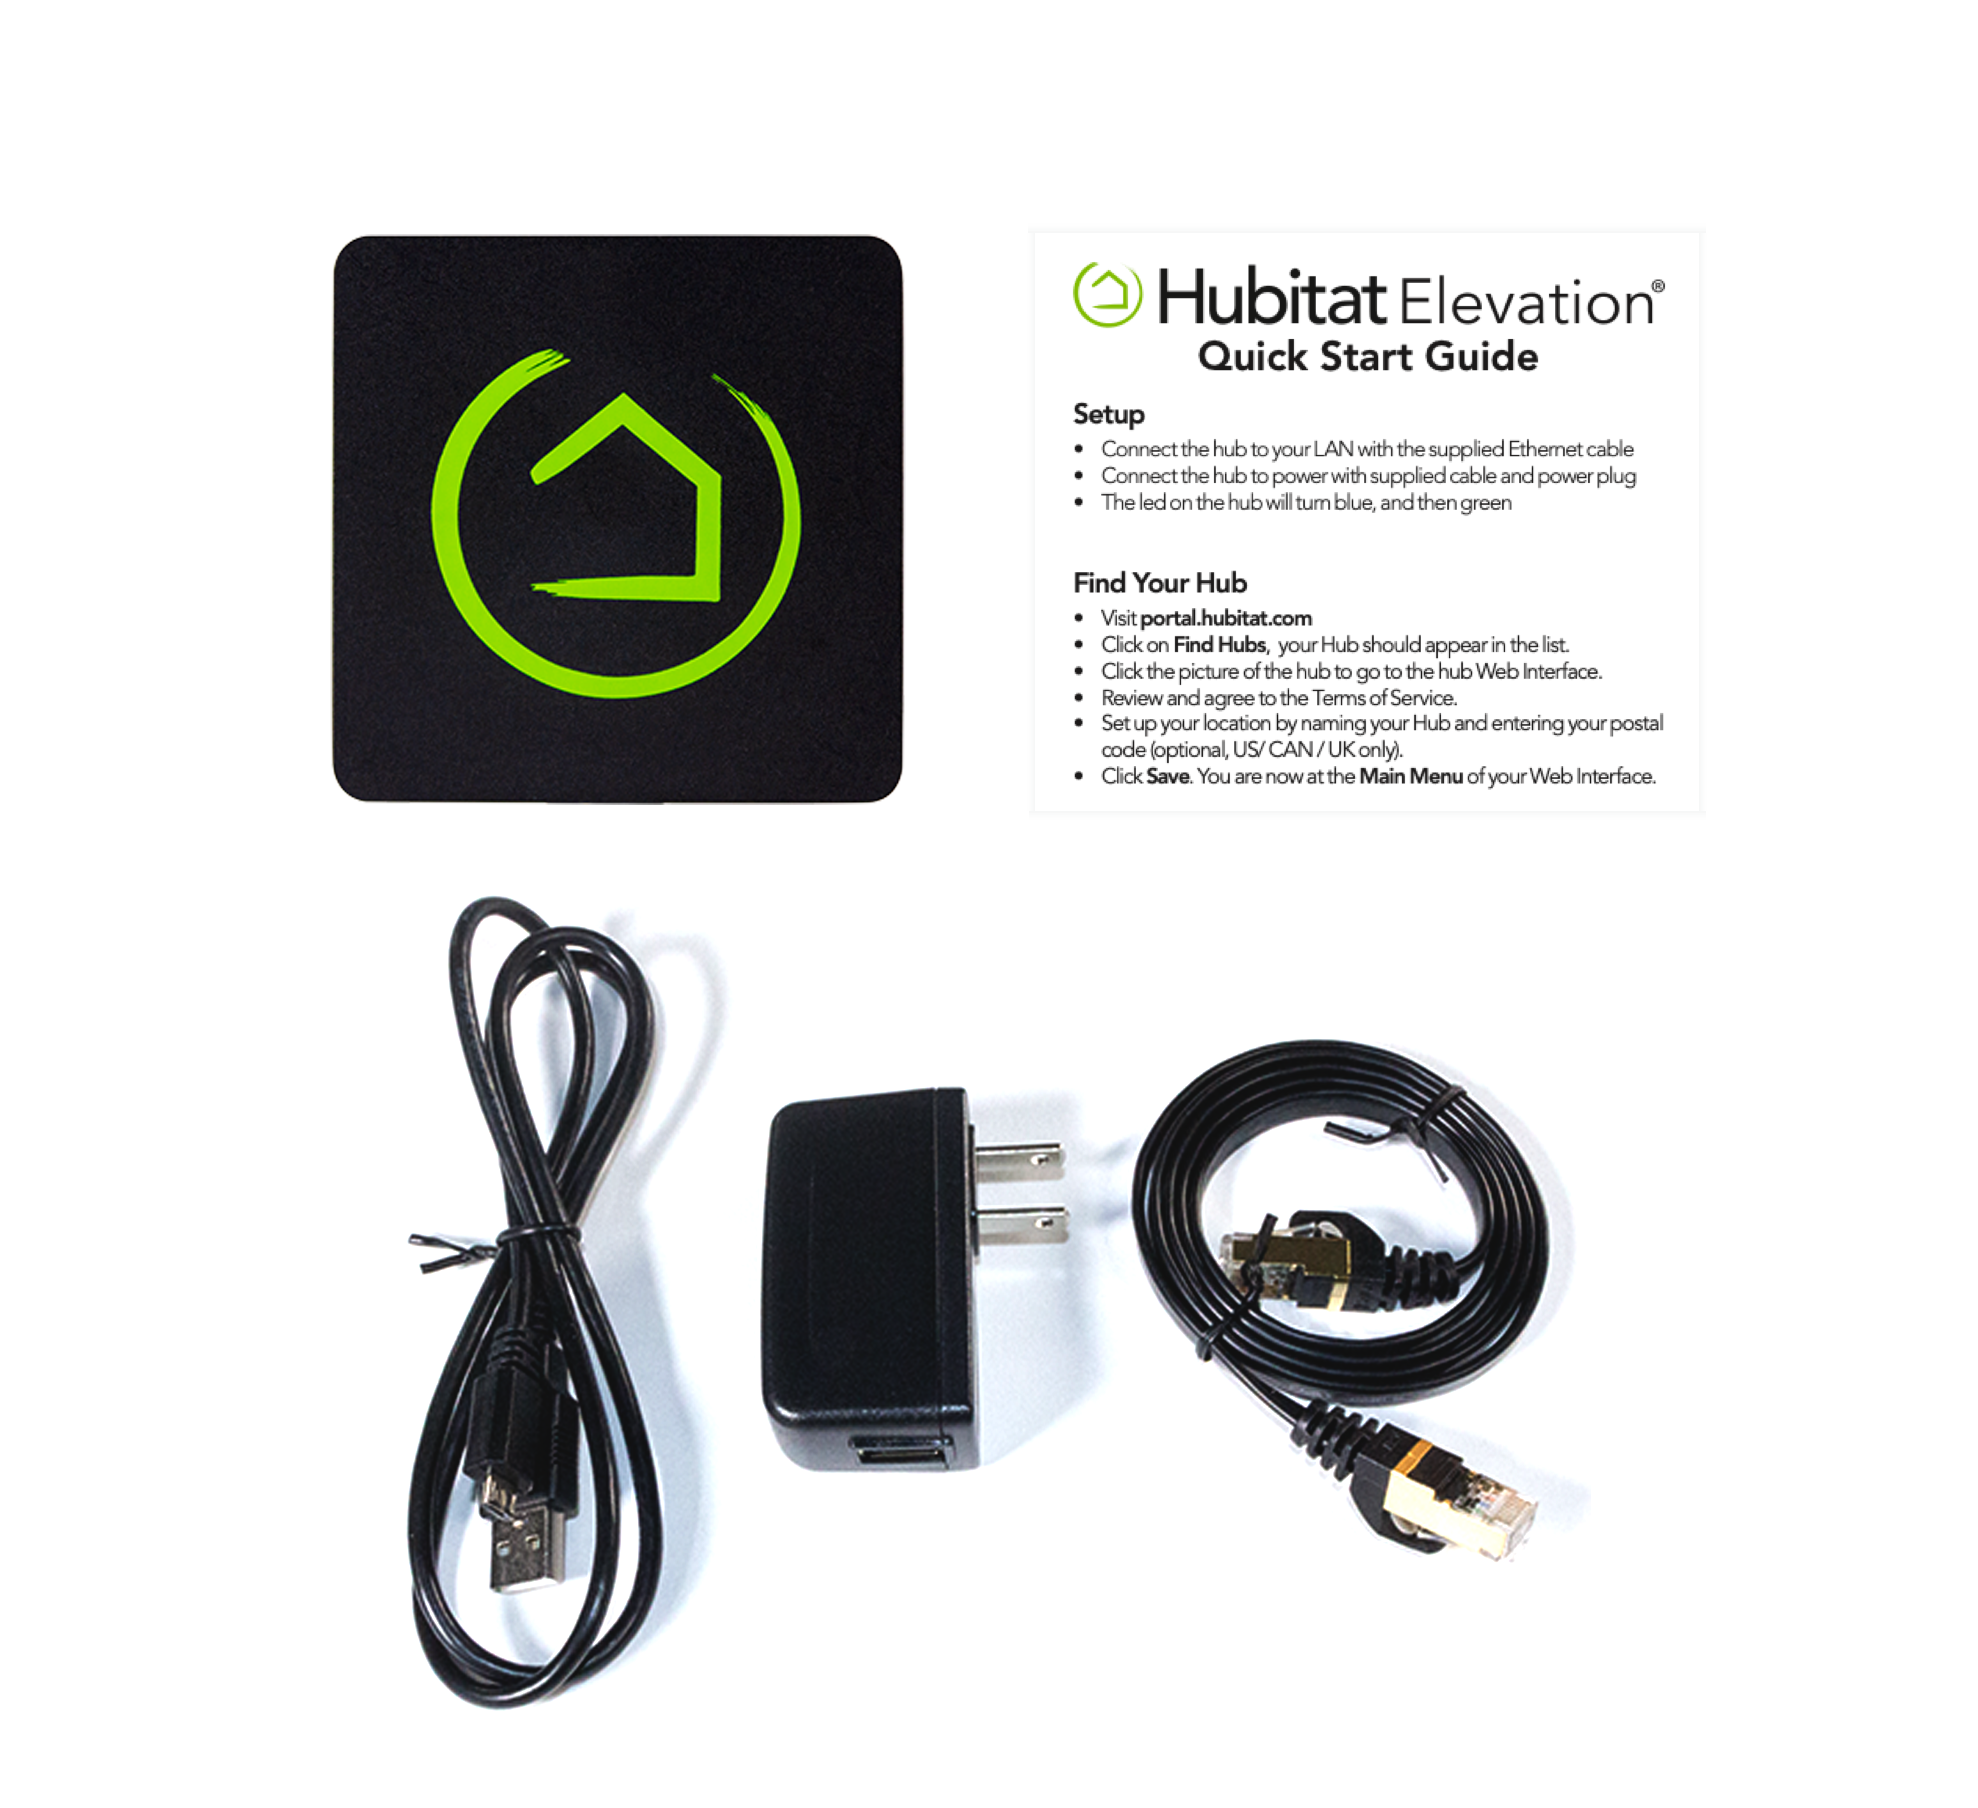 Your Hubbitat Elevation includes the hub, a micro USB cable and 5 volt power adapter, an Ethernet cable and a quick start guide also available in the How-to guides section